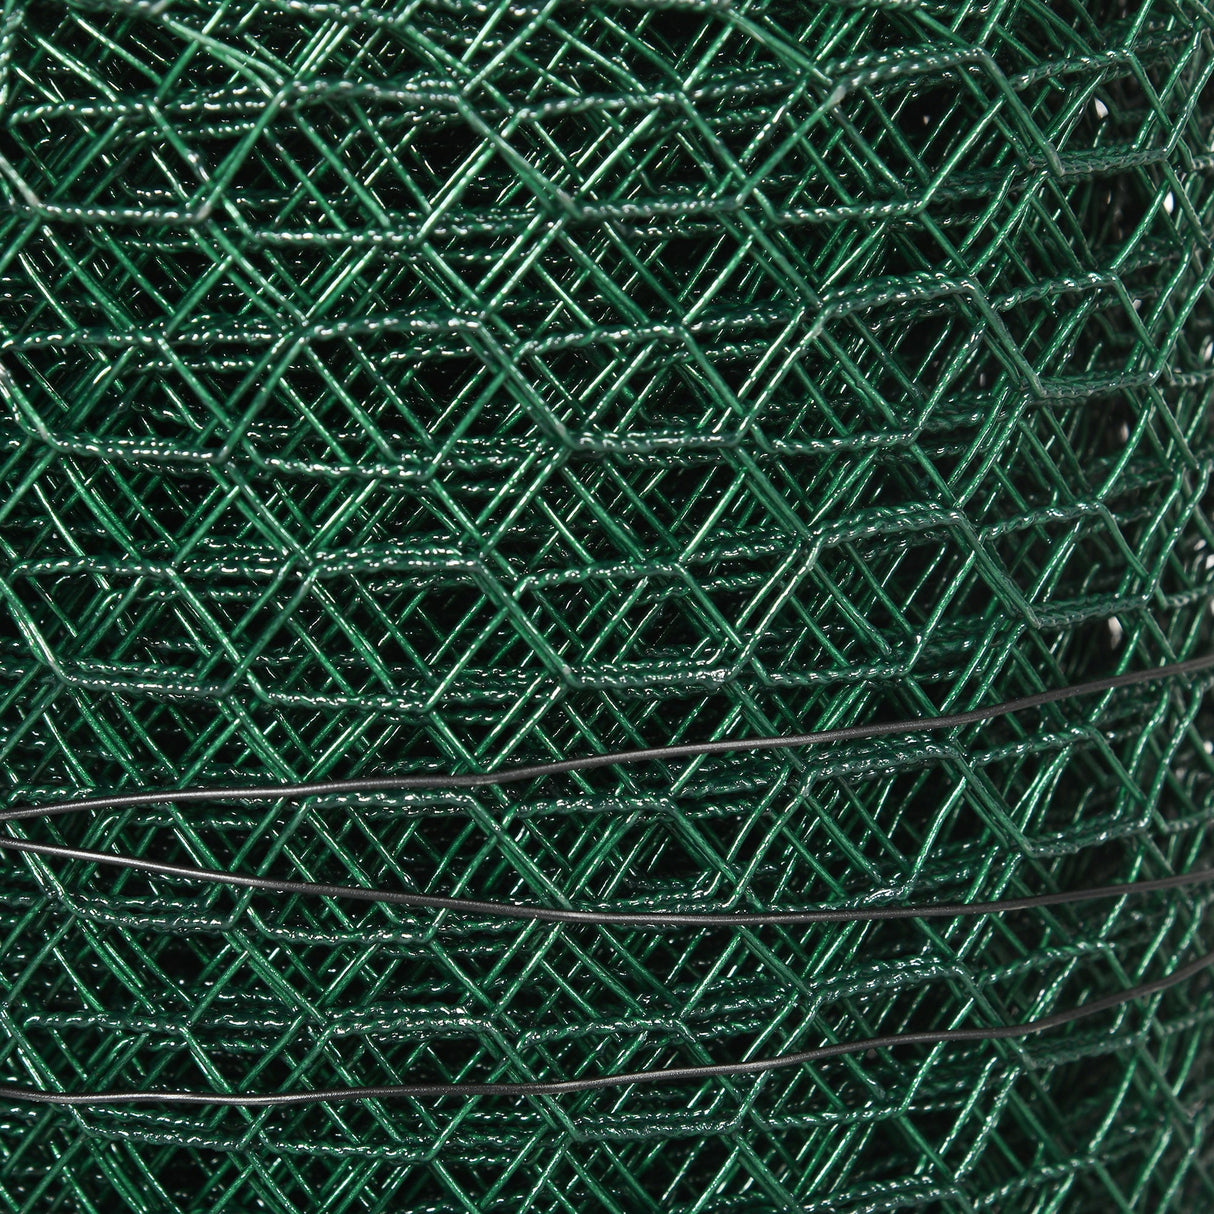 1m x 25m Chicken Wire Mesh, Foldable PVC Coated Welded Garden Fence, Roll Poultry Netting, for Rabbits, Ducks, Gooses, Dark, PawHut,